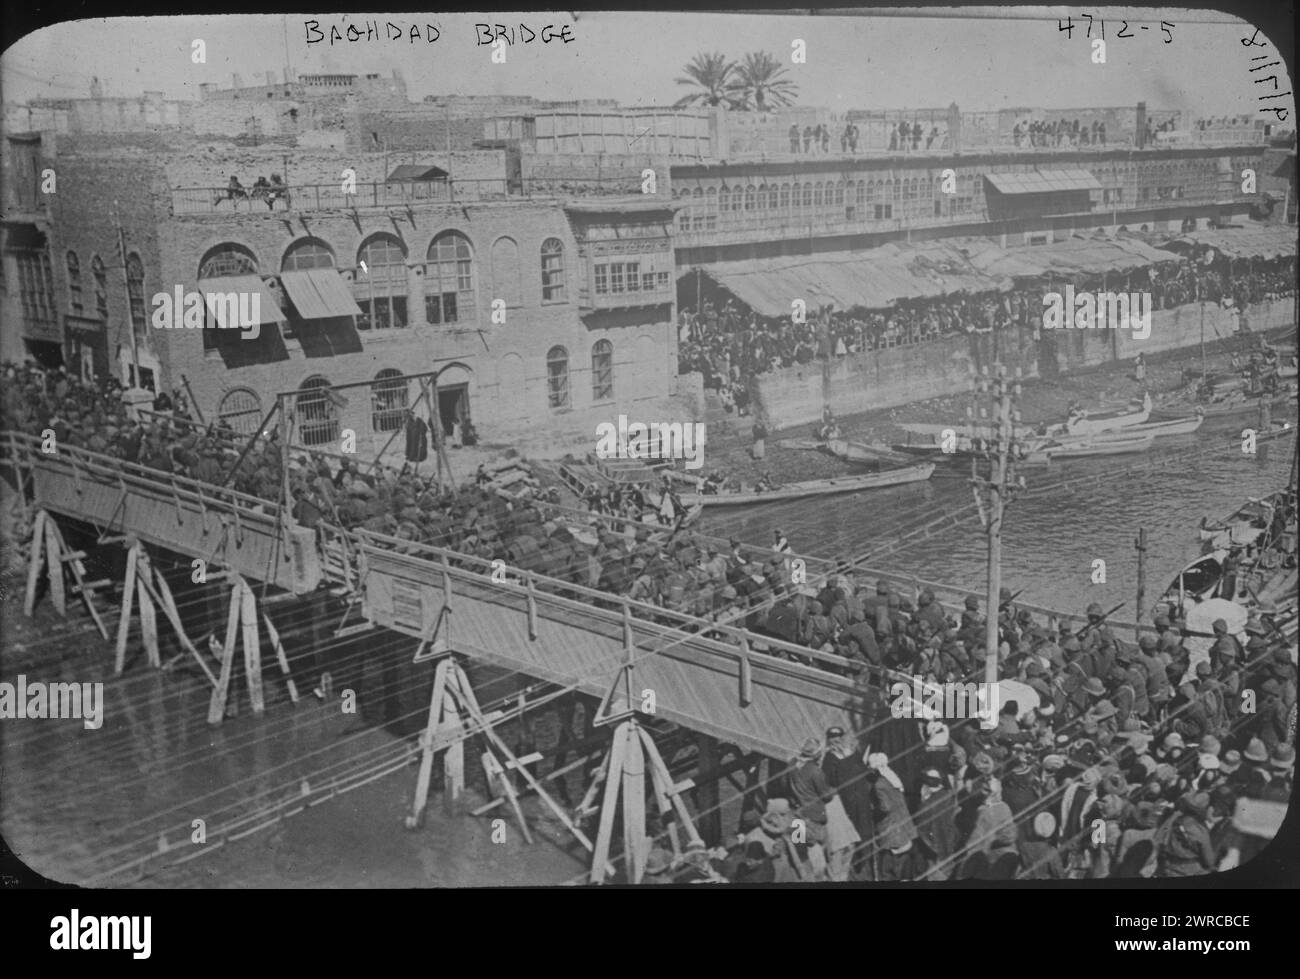 Bridge over Ashar Creek, Basra, Iraq, Photograph shows people, including soldiers, crossing a bridge over Ashar Creek in Basra, Iraq., 1918 Sept. 7, Glass negatives, 1 negative: glass Stock Photo